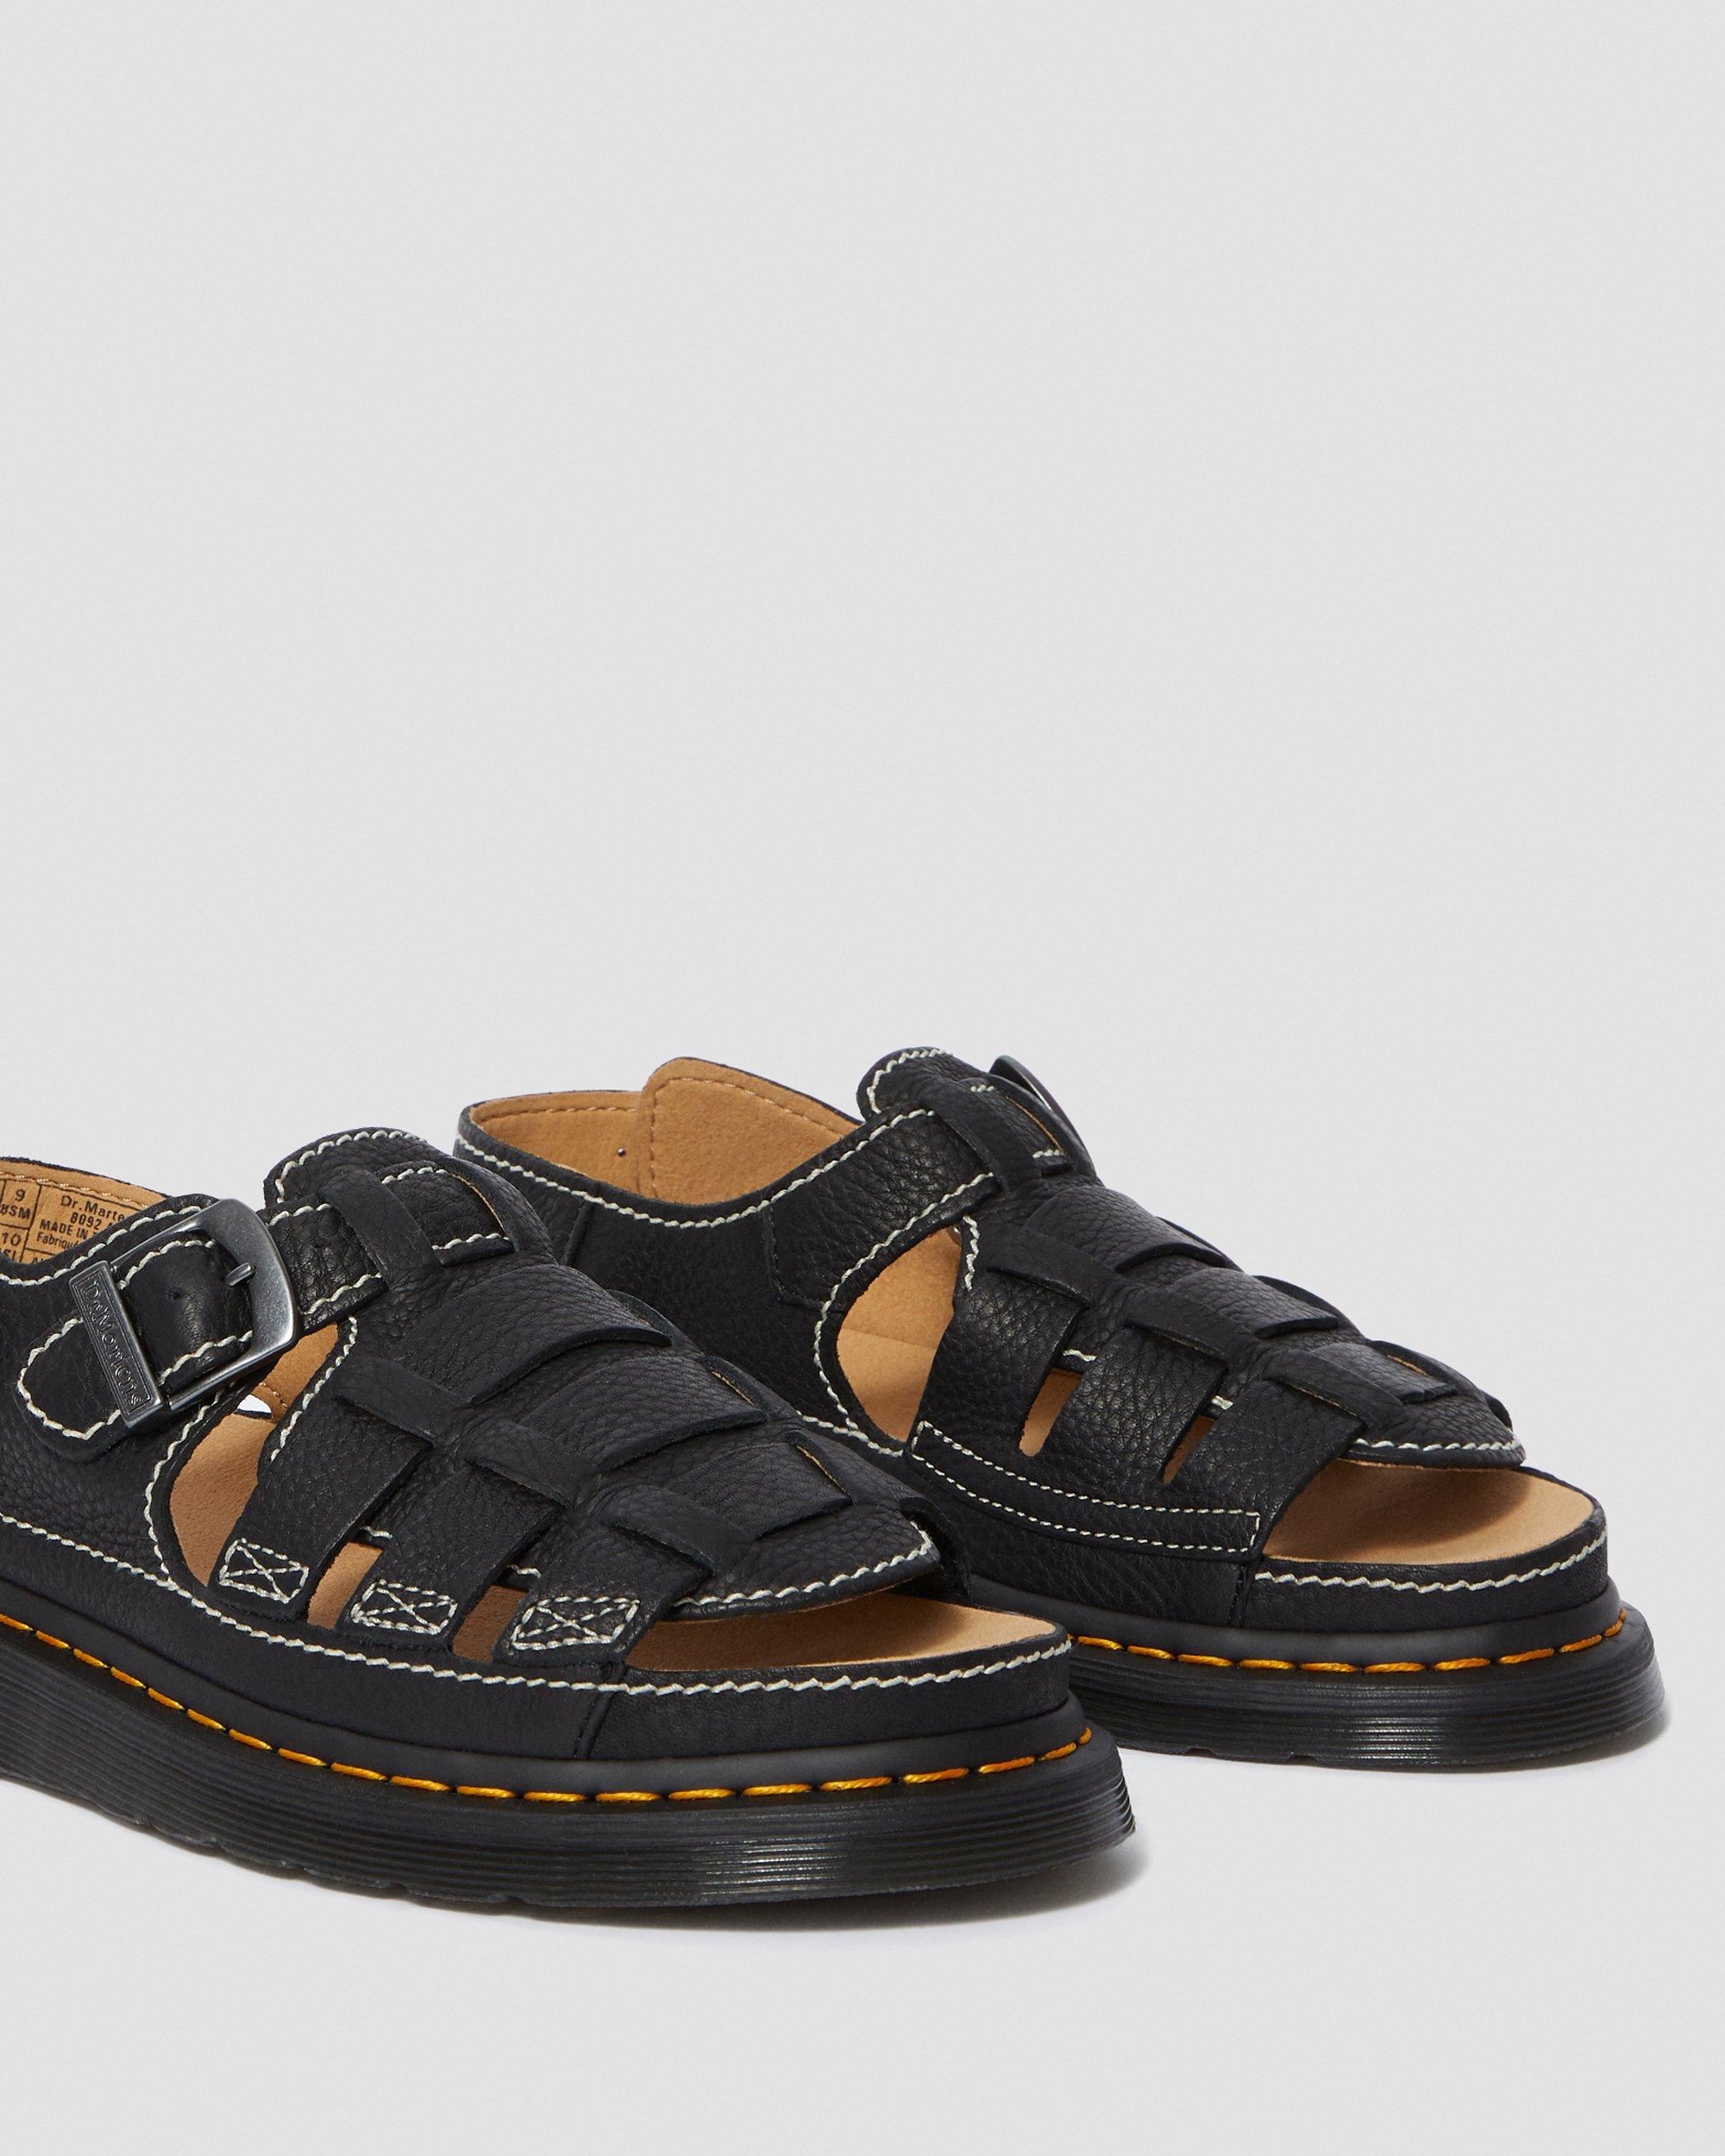 8092 Leather Fisherman Sandals | Dr 